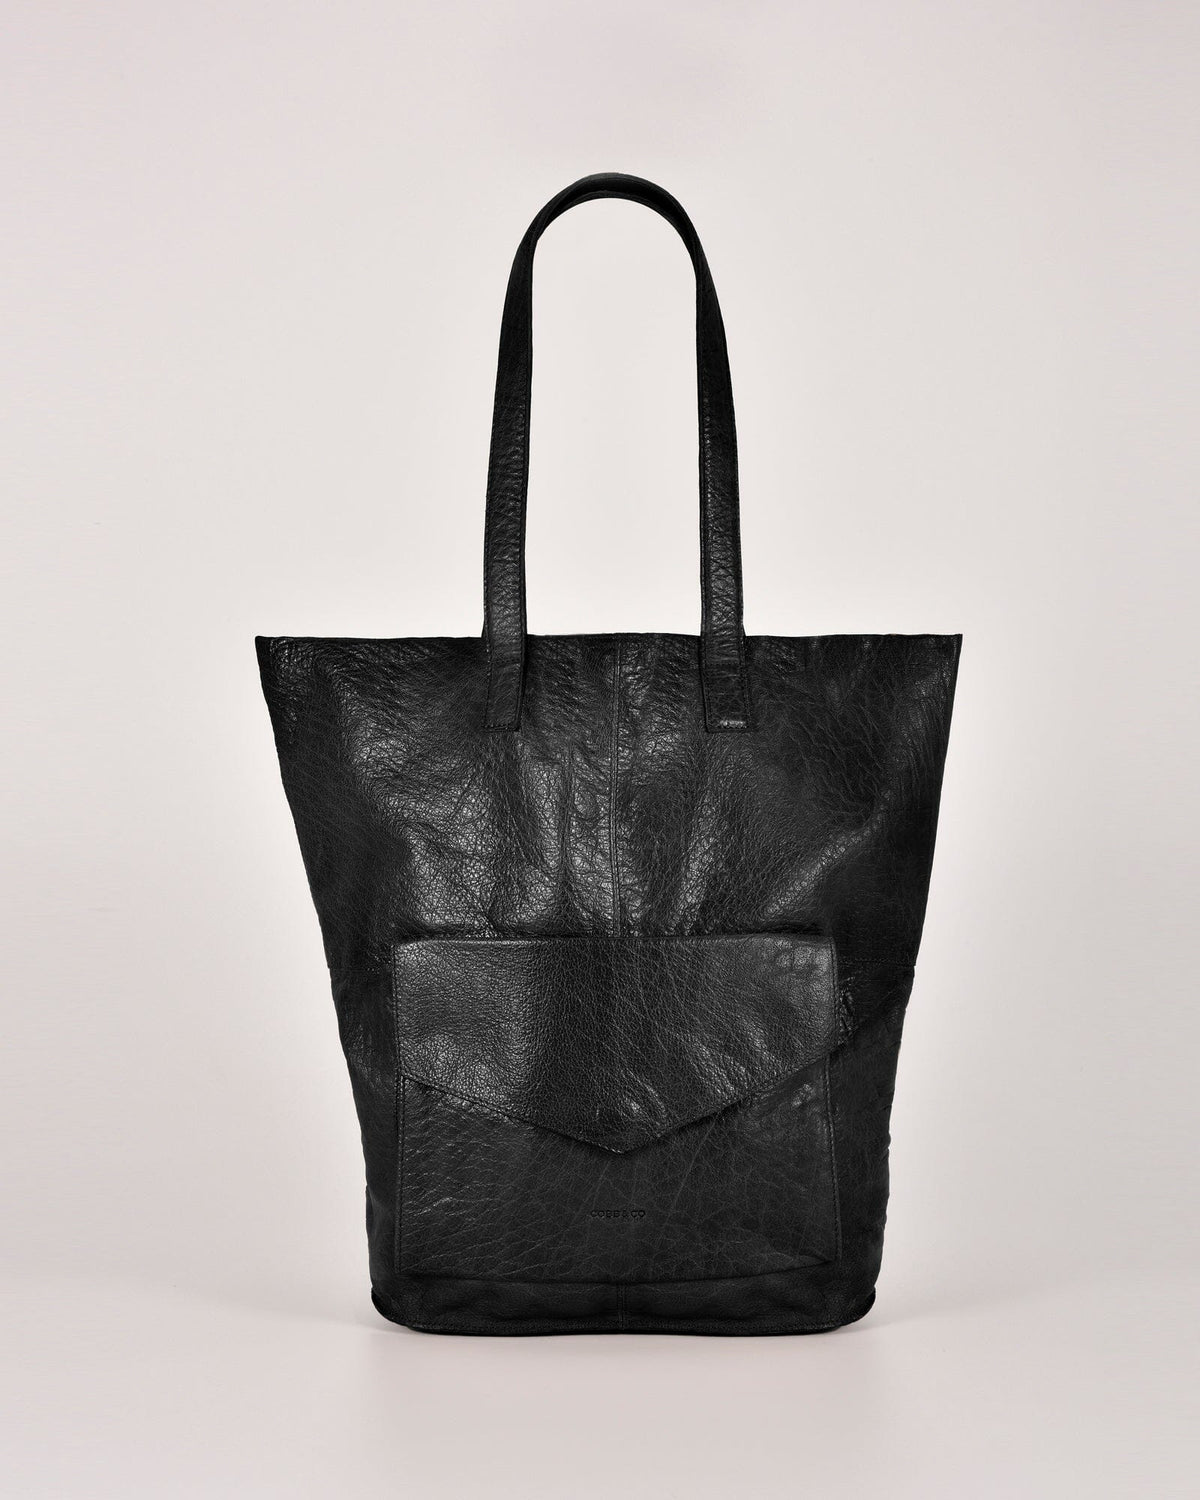 Hotham Leather Tote with front flap pocket